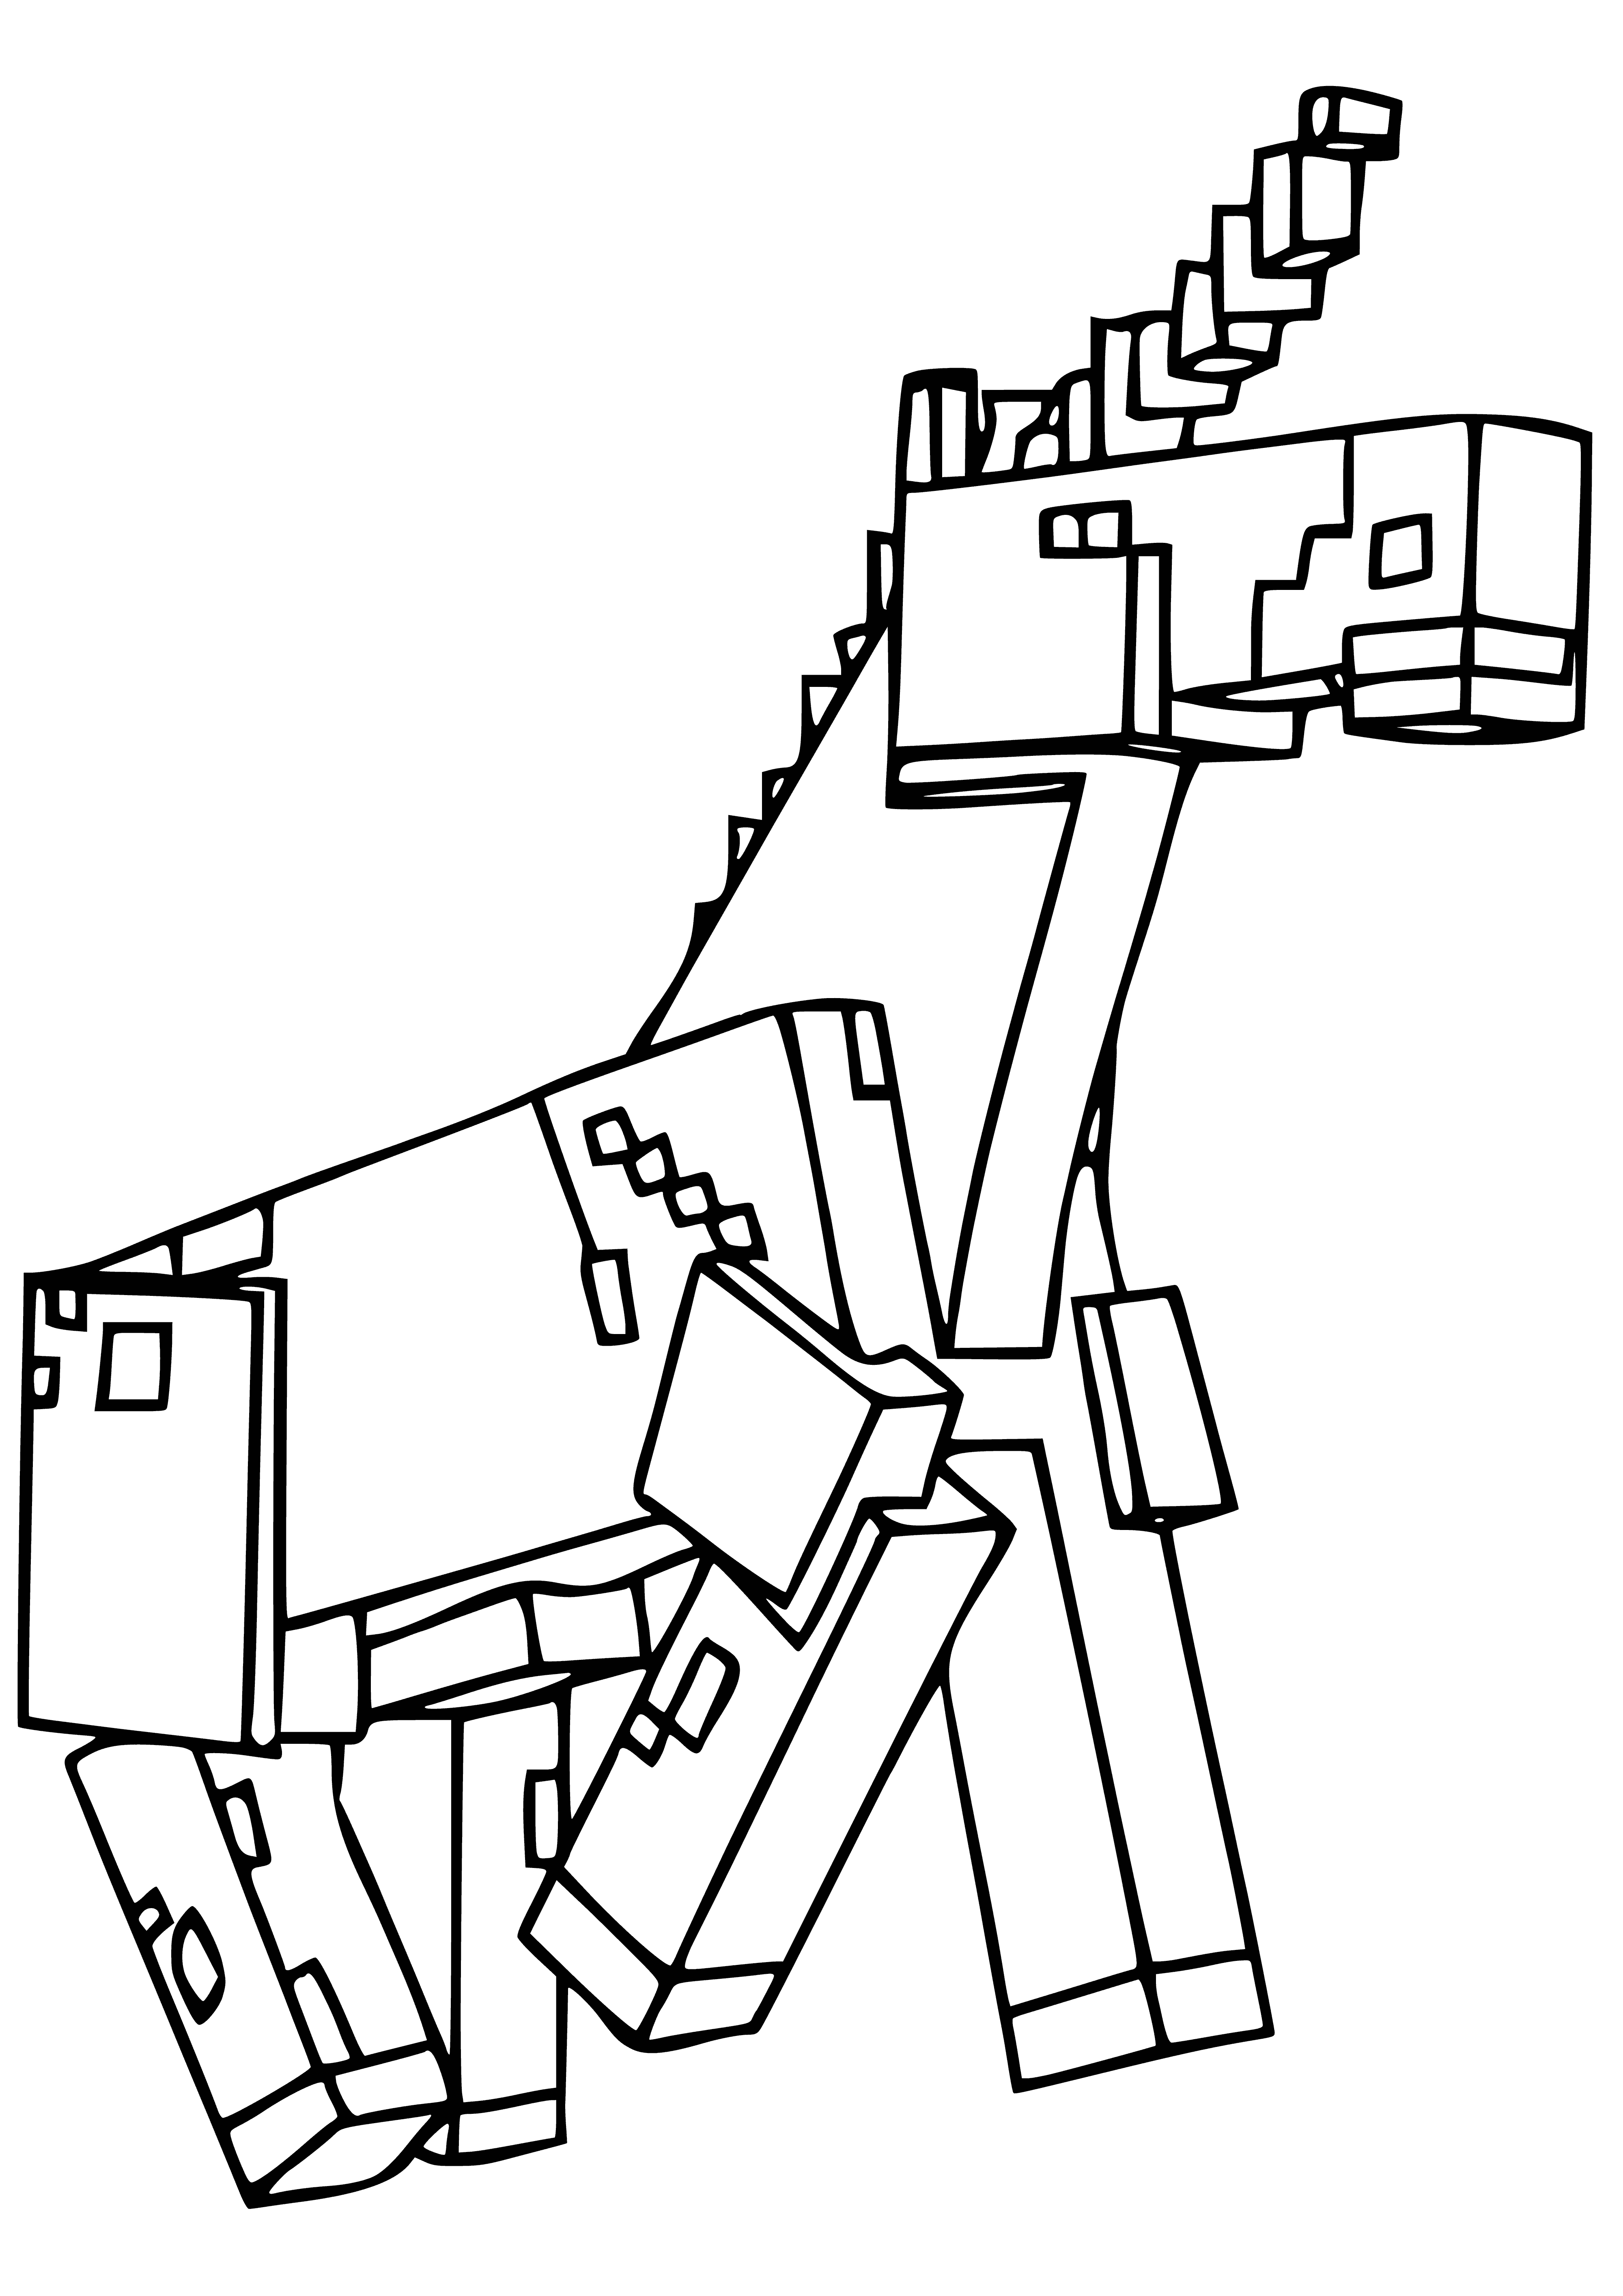 coloring page: A white horse with a golden horn stands in a grassy field with trees in the background--a magical Minecraft Unicorn!